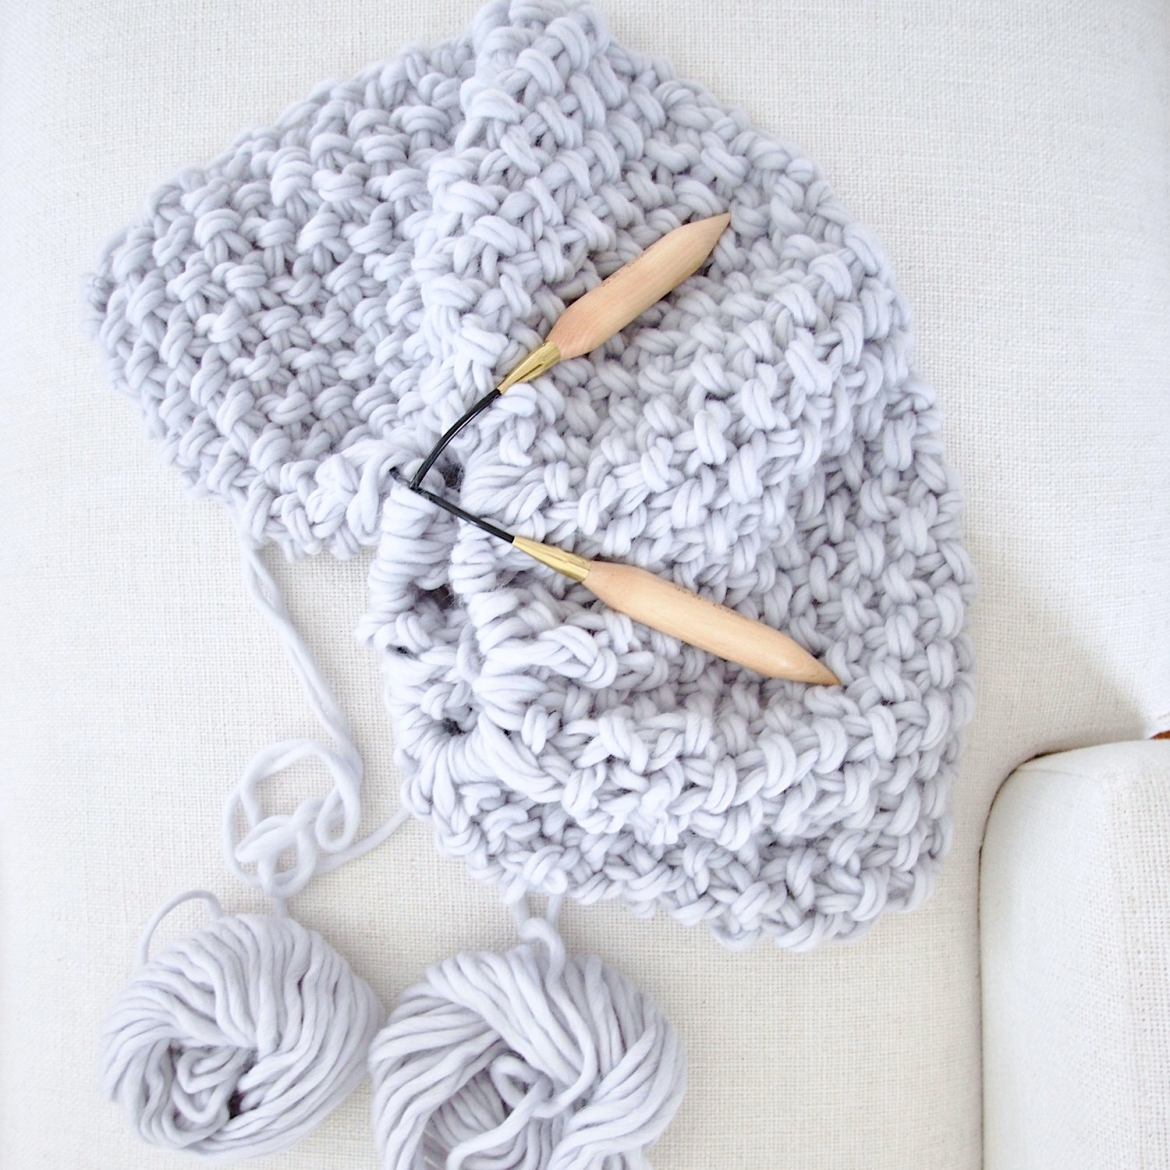 FREE Chunky Knit Blanket Pattern with tassels ! - Design ...